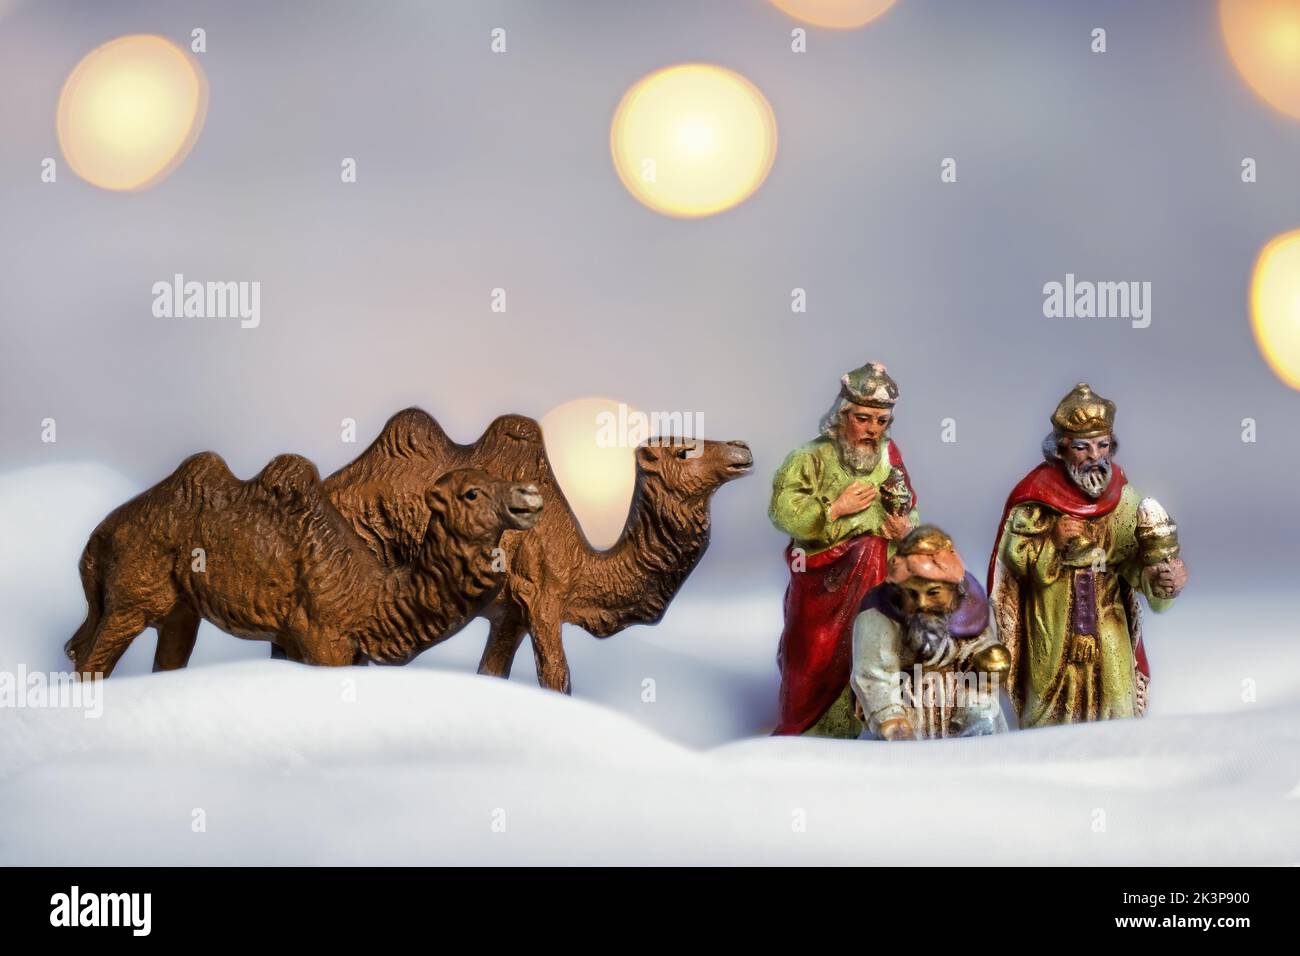 antique figures of the three kings with two camels, christmas picture Stock Photo